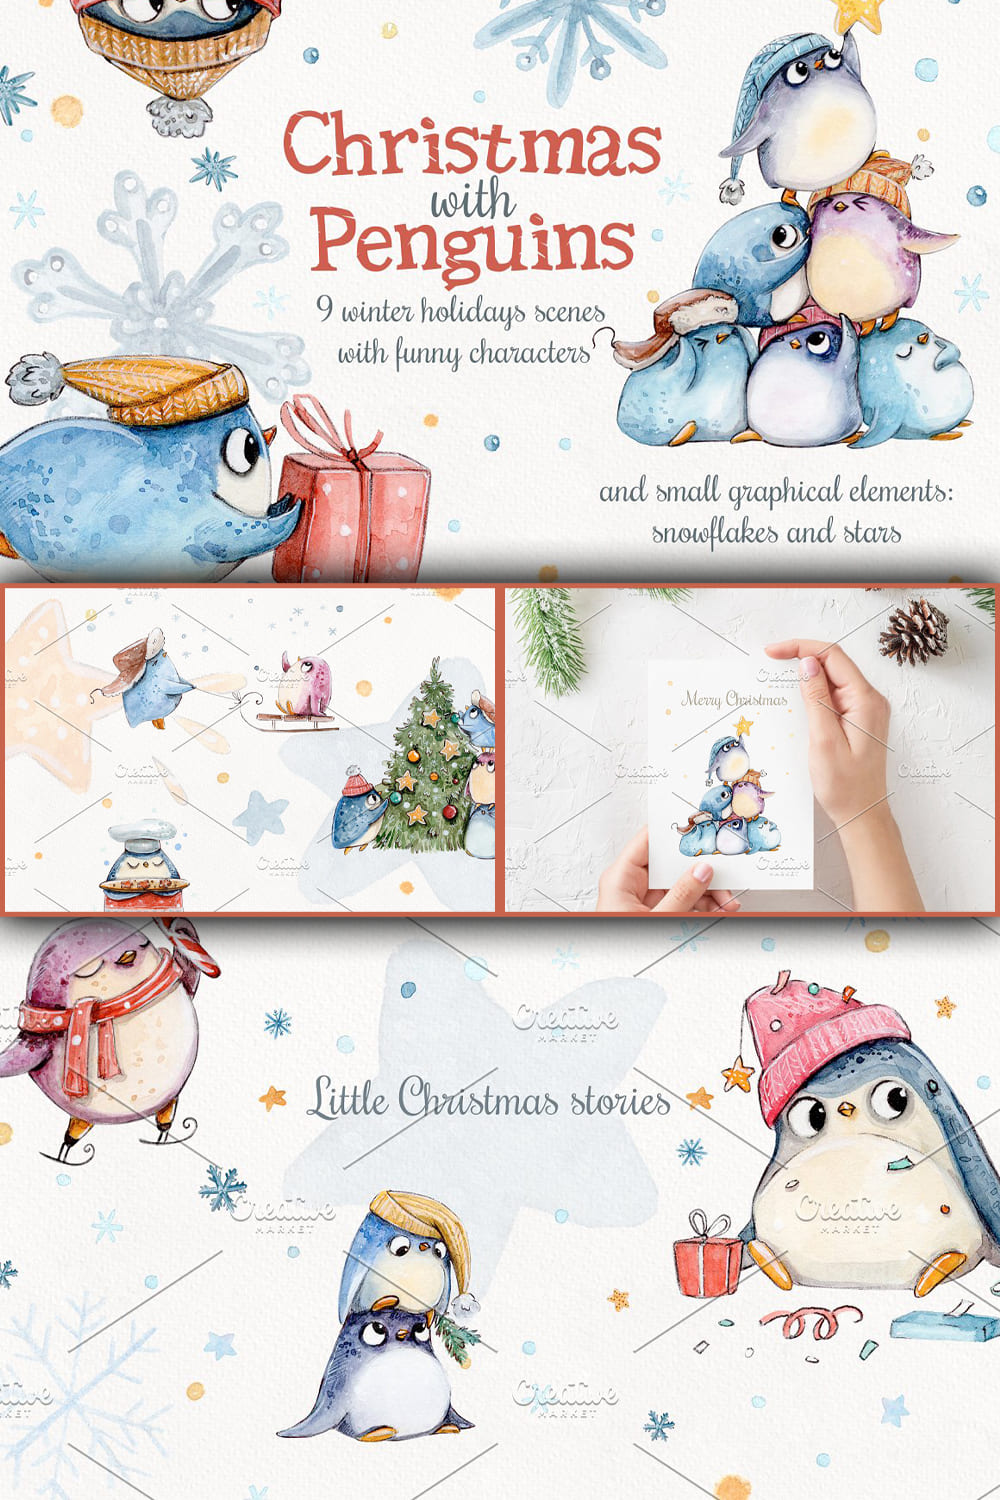 Christmas With Penguins - Pinterest.